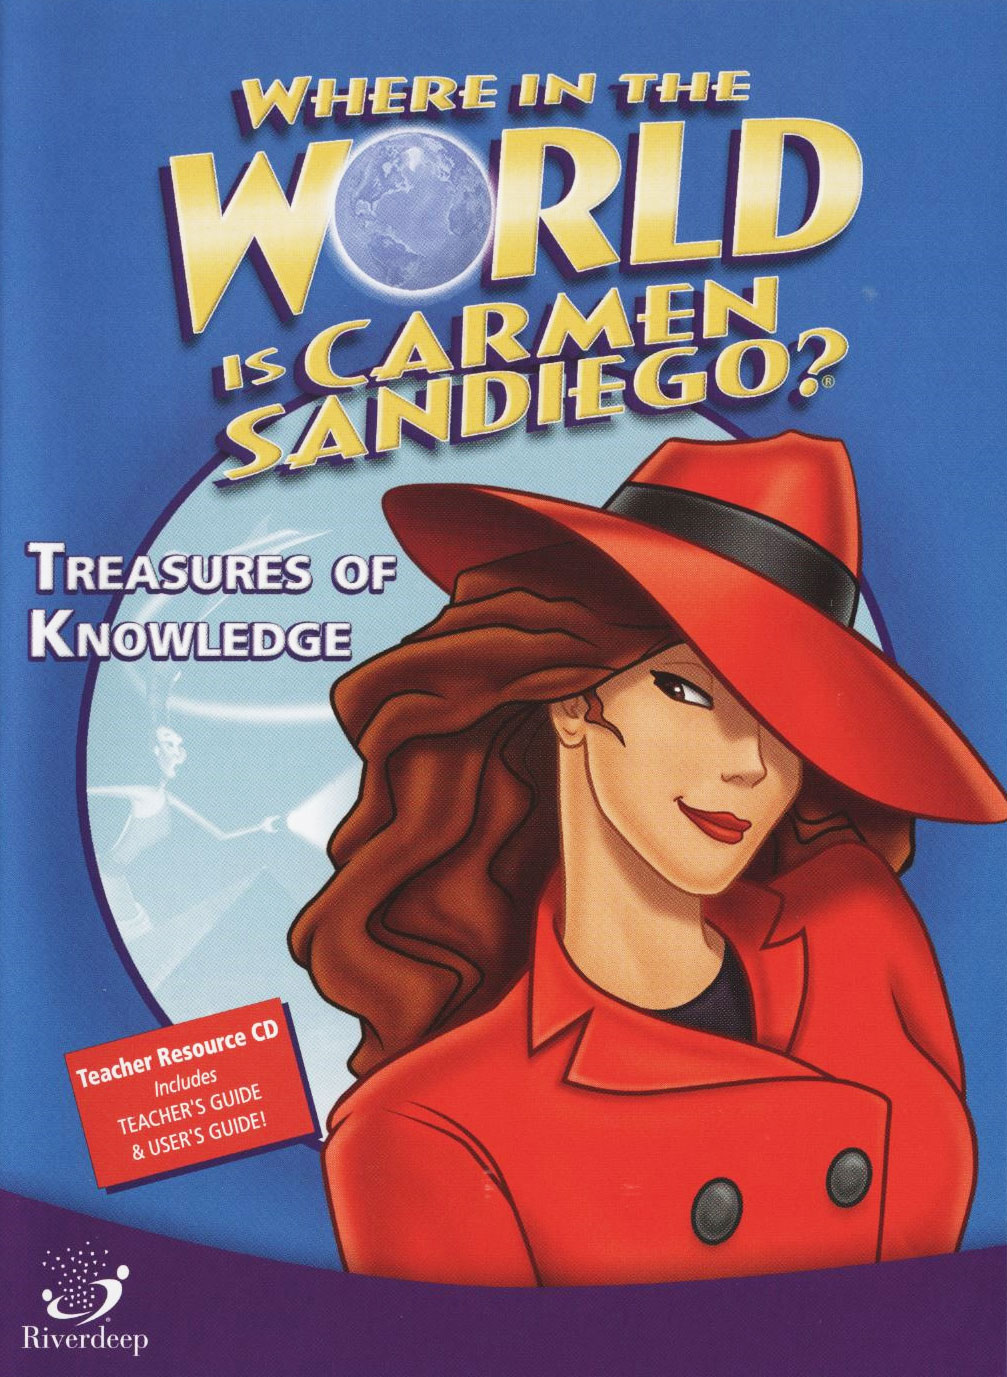 is there a carmen sandiego app